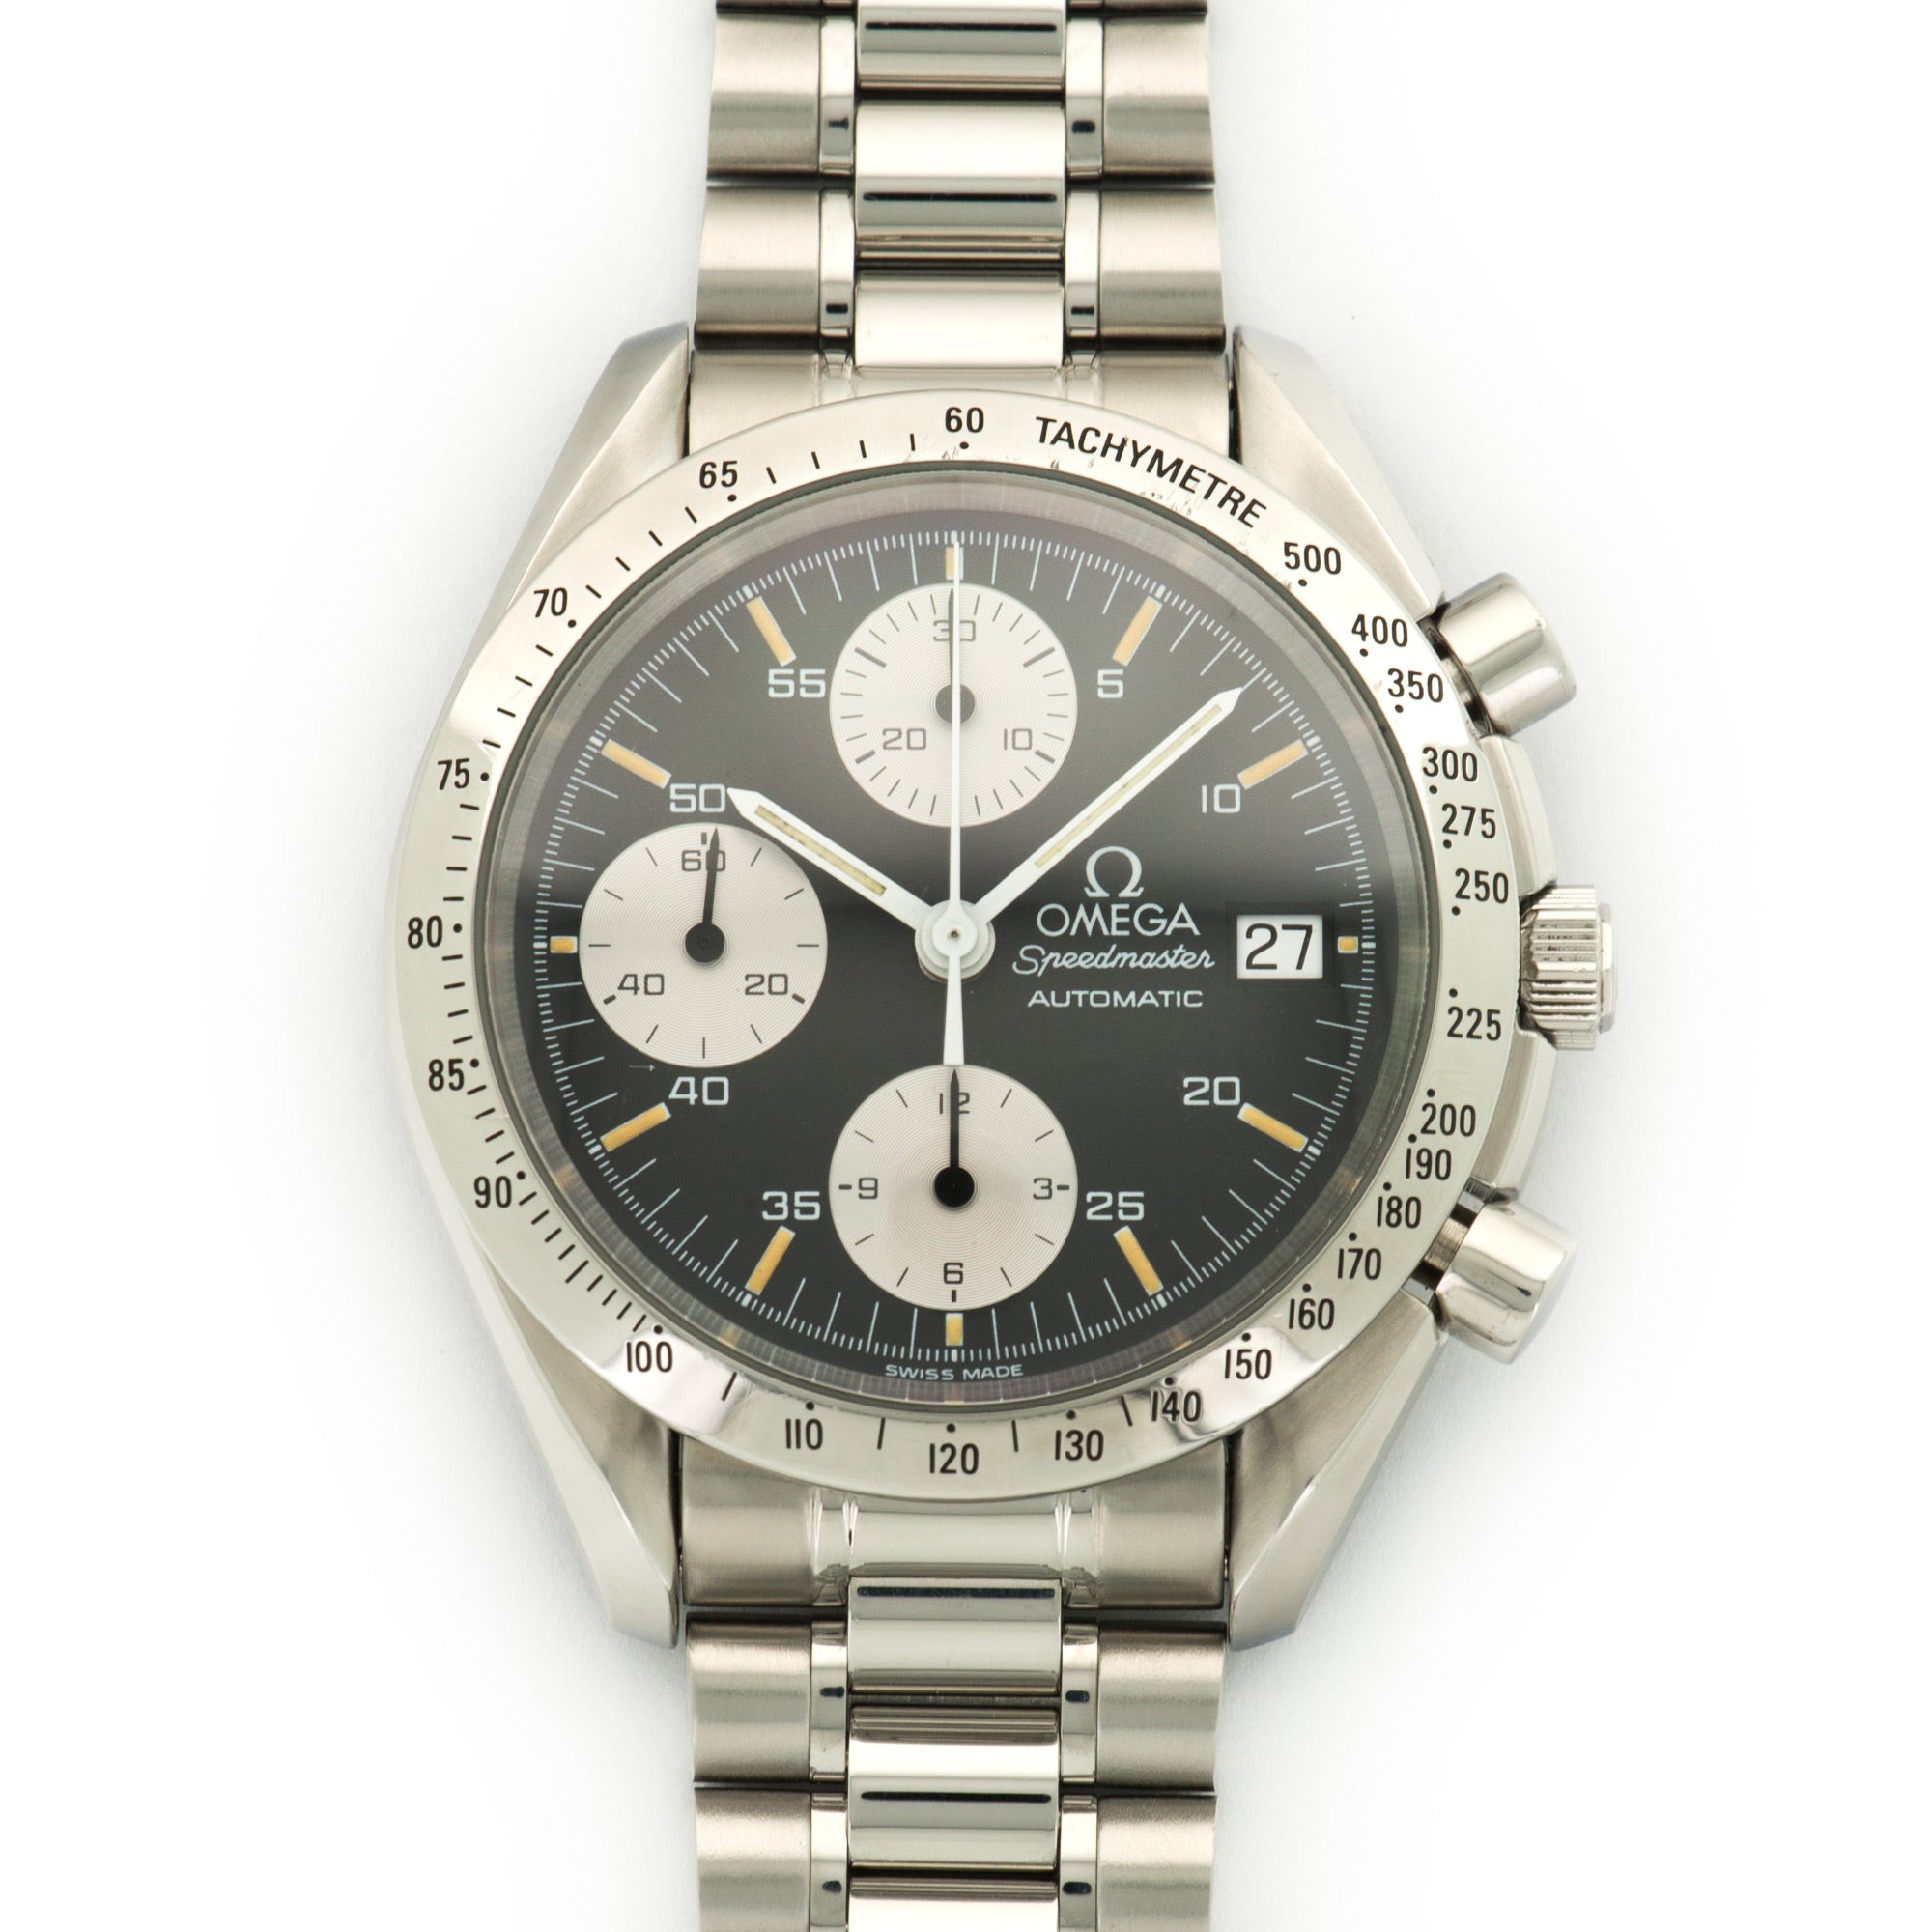 Omega - Omega Stainless Steel Speedmaster Chronograph Watch, ref. 175.0043 - The Keystone Watches